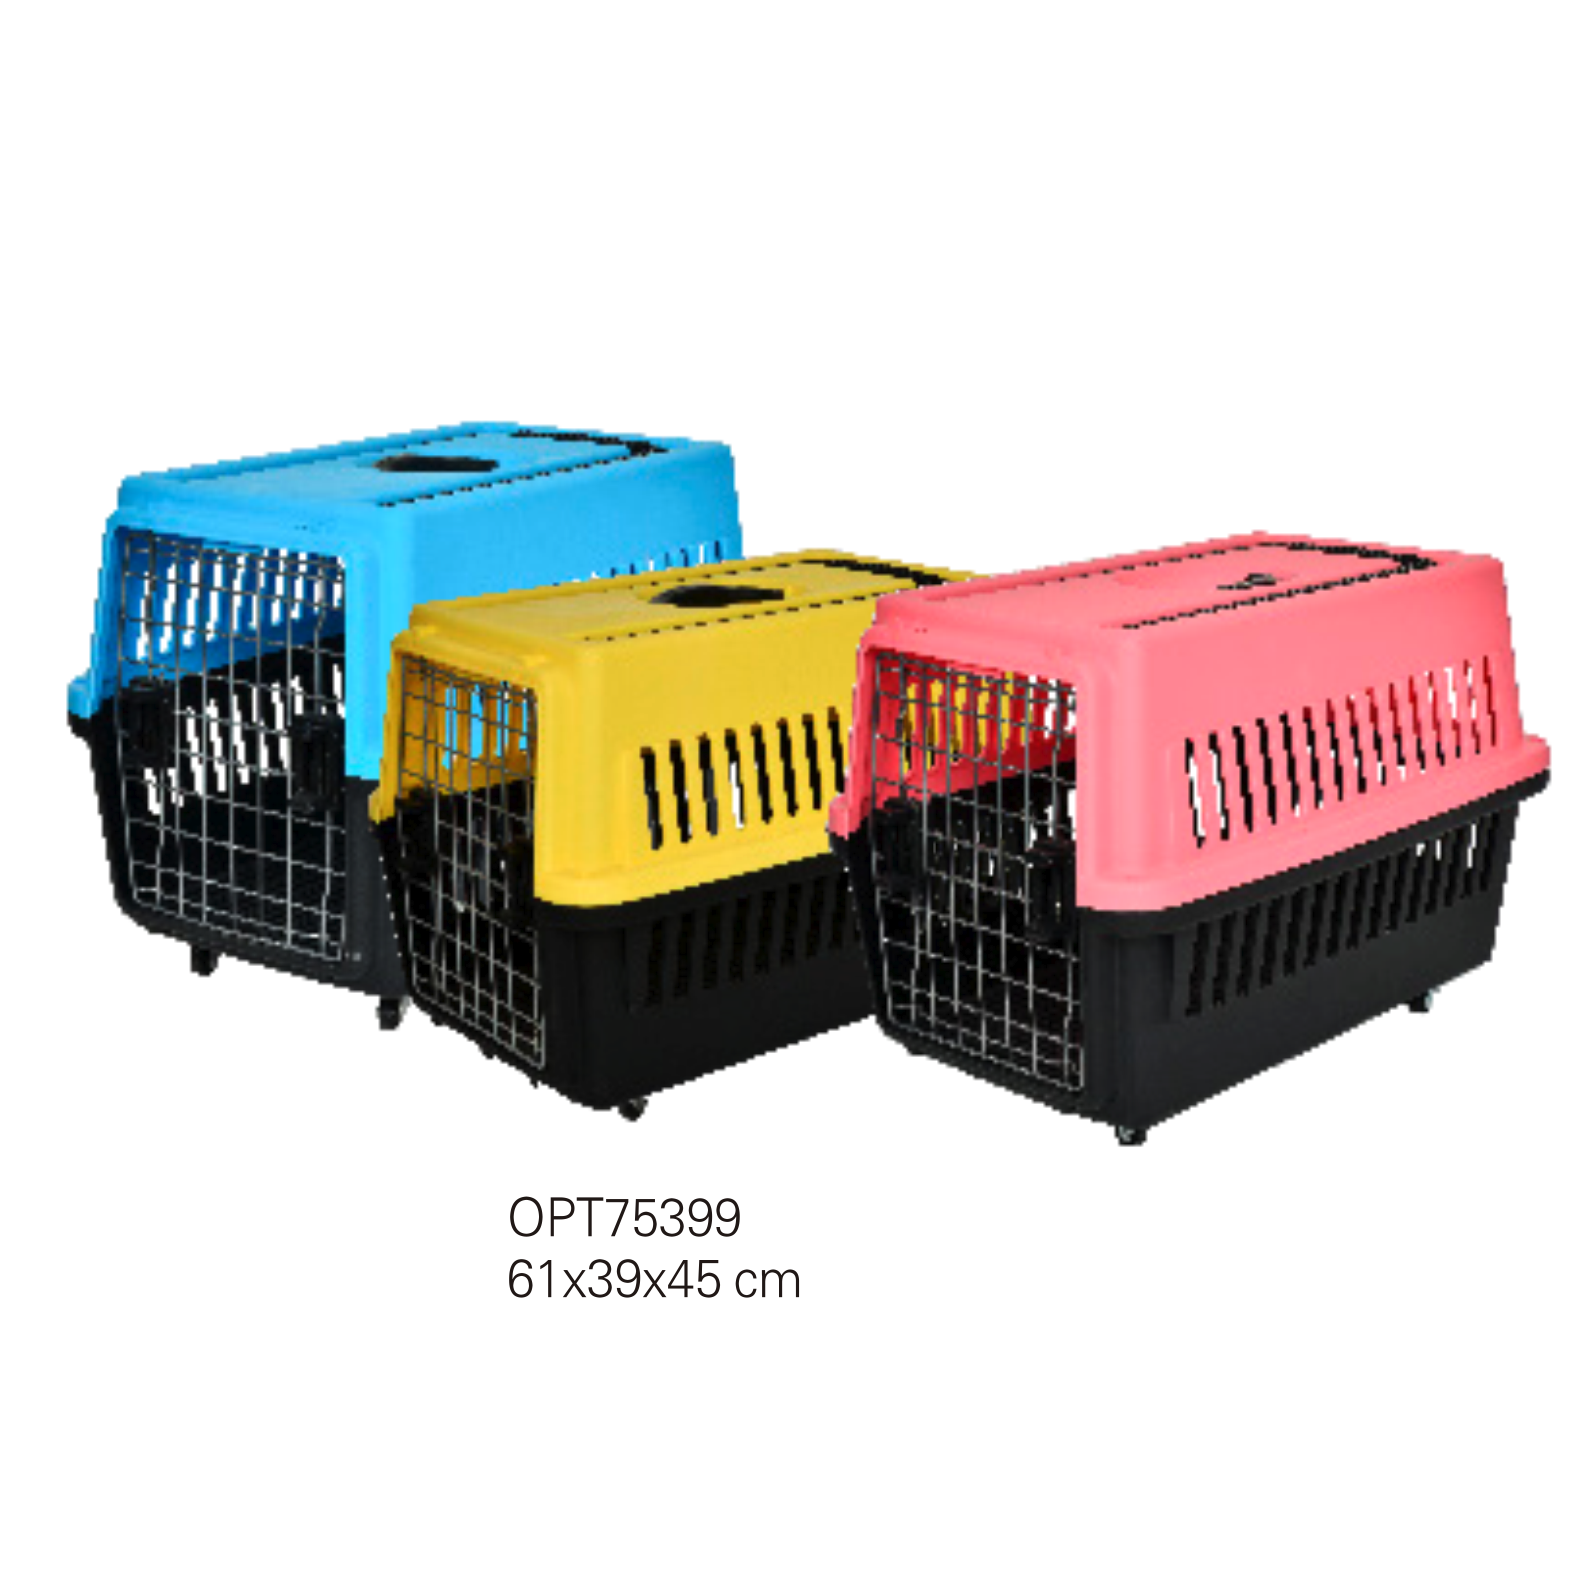 Pet carriers OPT75399